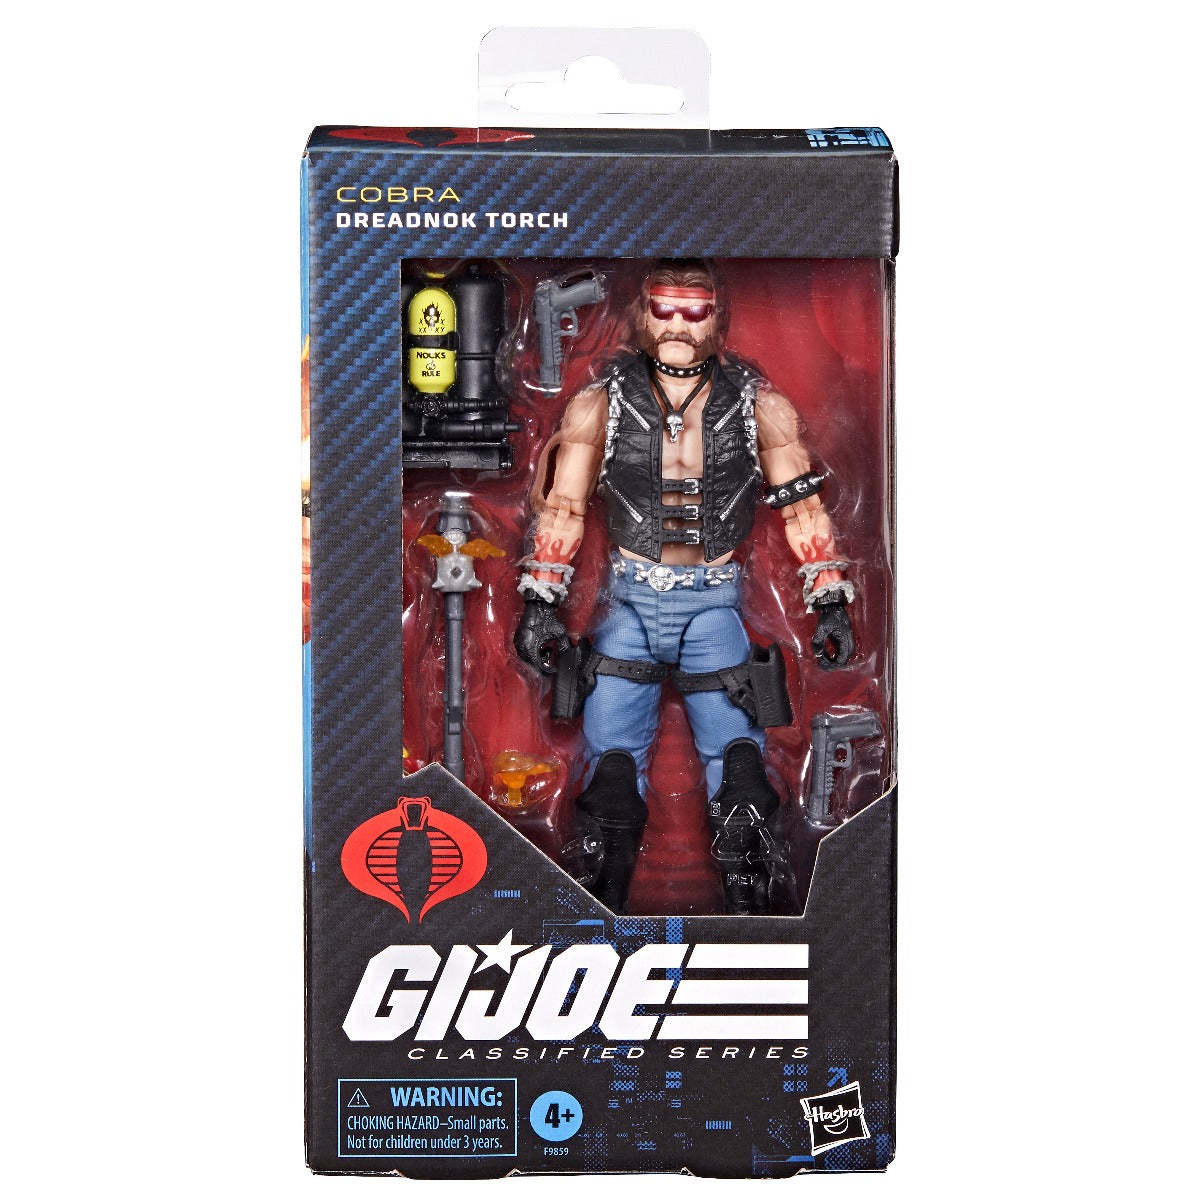 G.I. Joe Classified Series #123, Dreadnok Torch, Collectible 6 Inch Action Figure with 8 Accessories